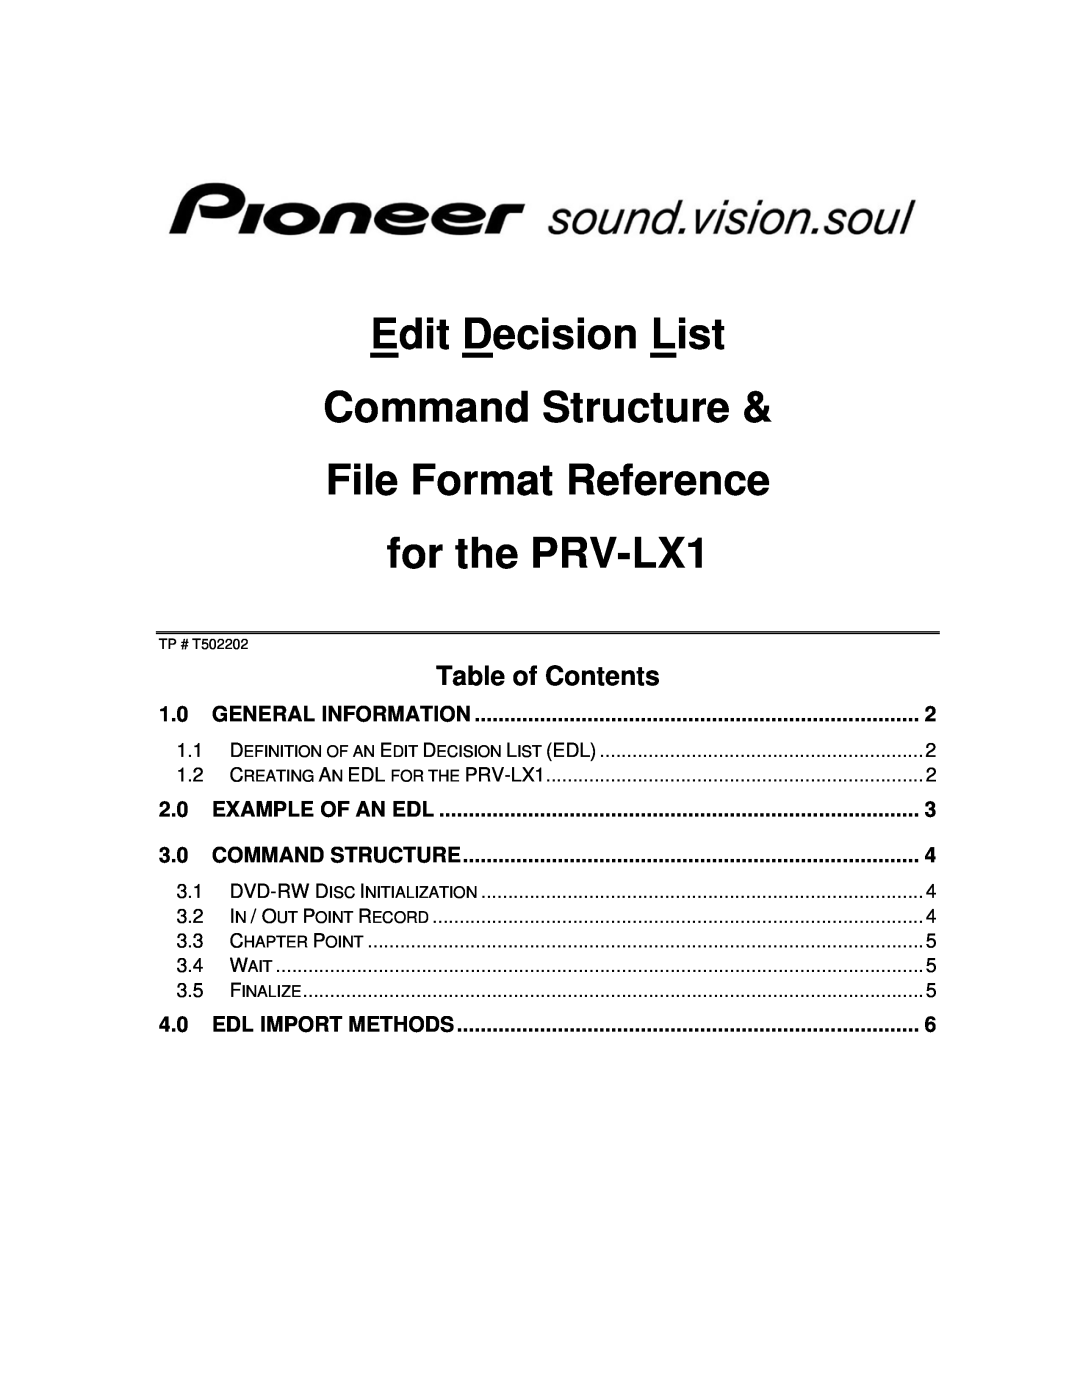 Pioneer T502202 manual General Information, Example Of An Edl, Command Structure, Edl Import Methods, for the PRV-LX1 